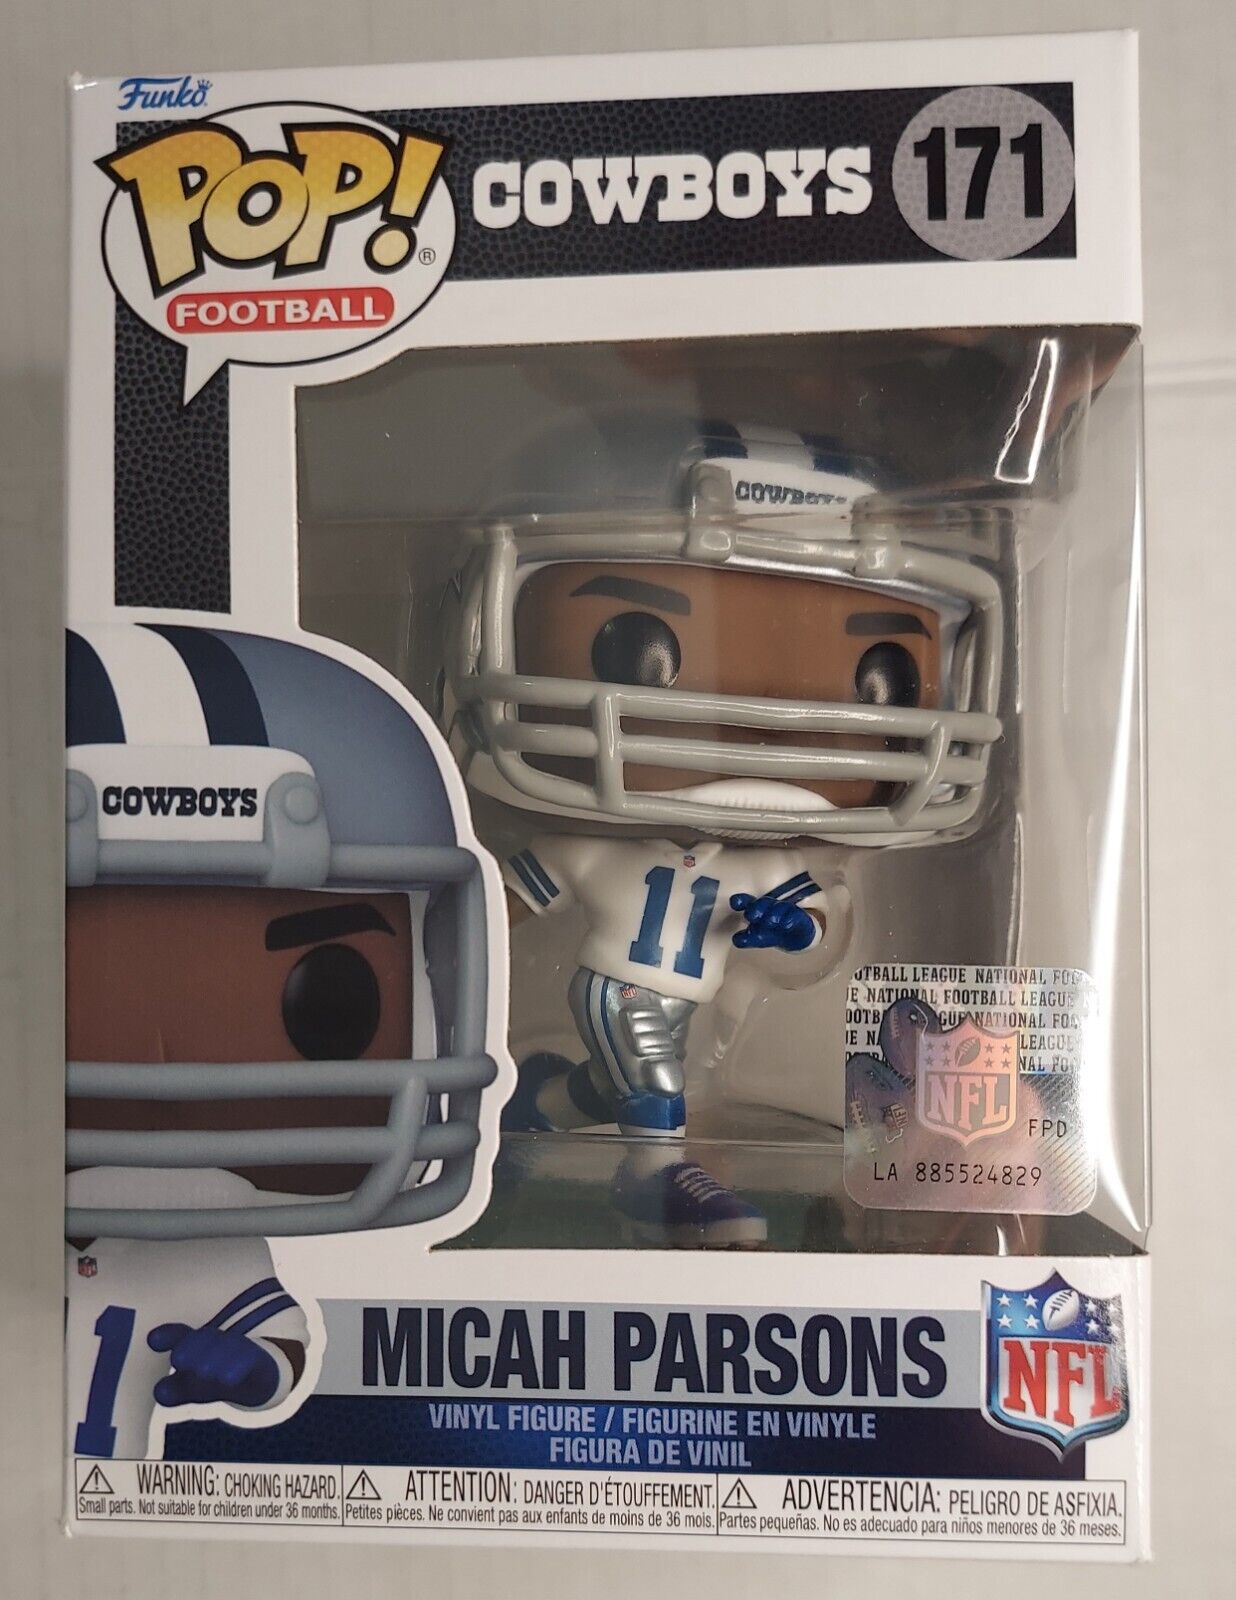 Micah Parsons funko POP Football Cowboys 171 Exclusive ship in sleeve